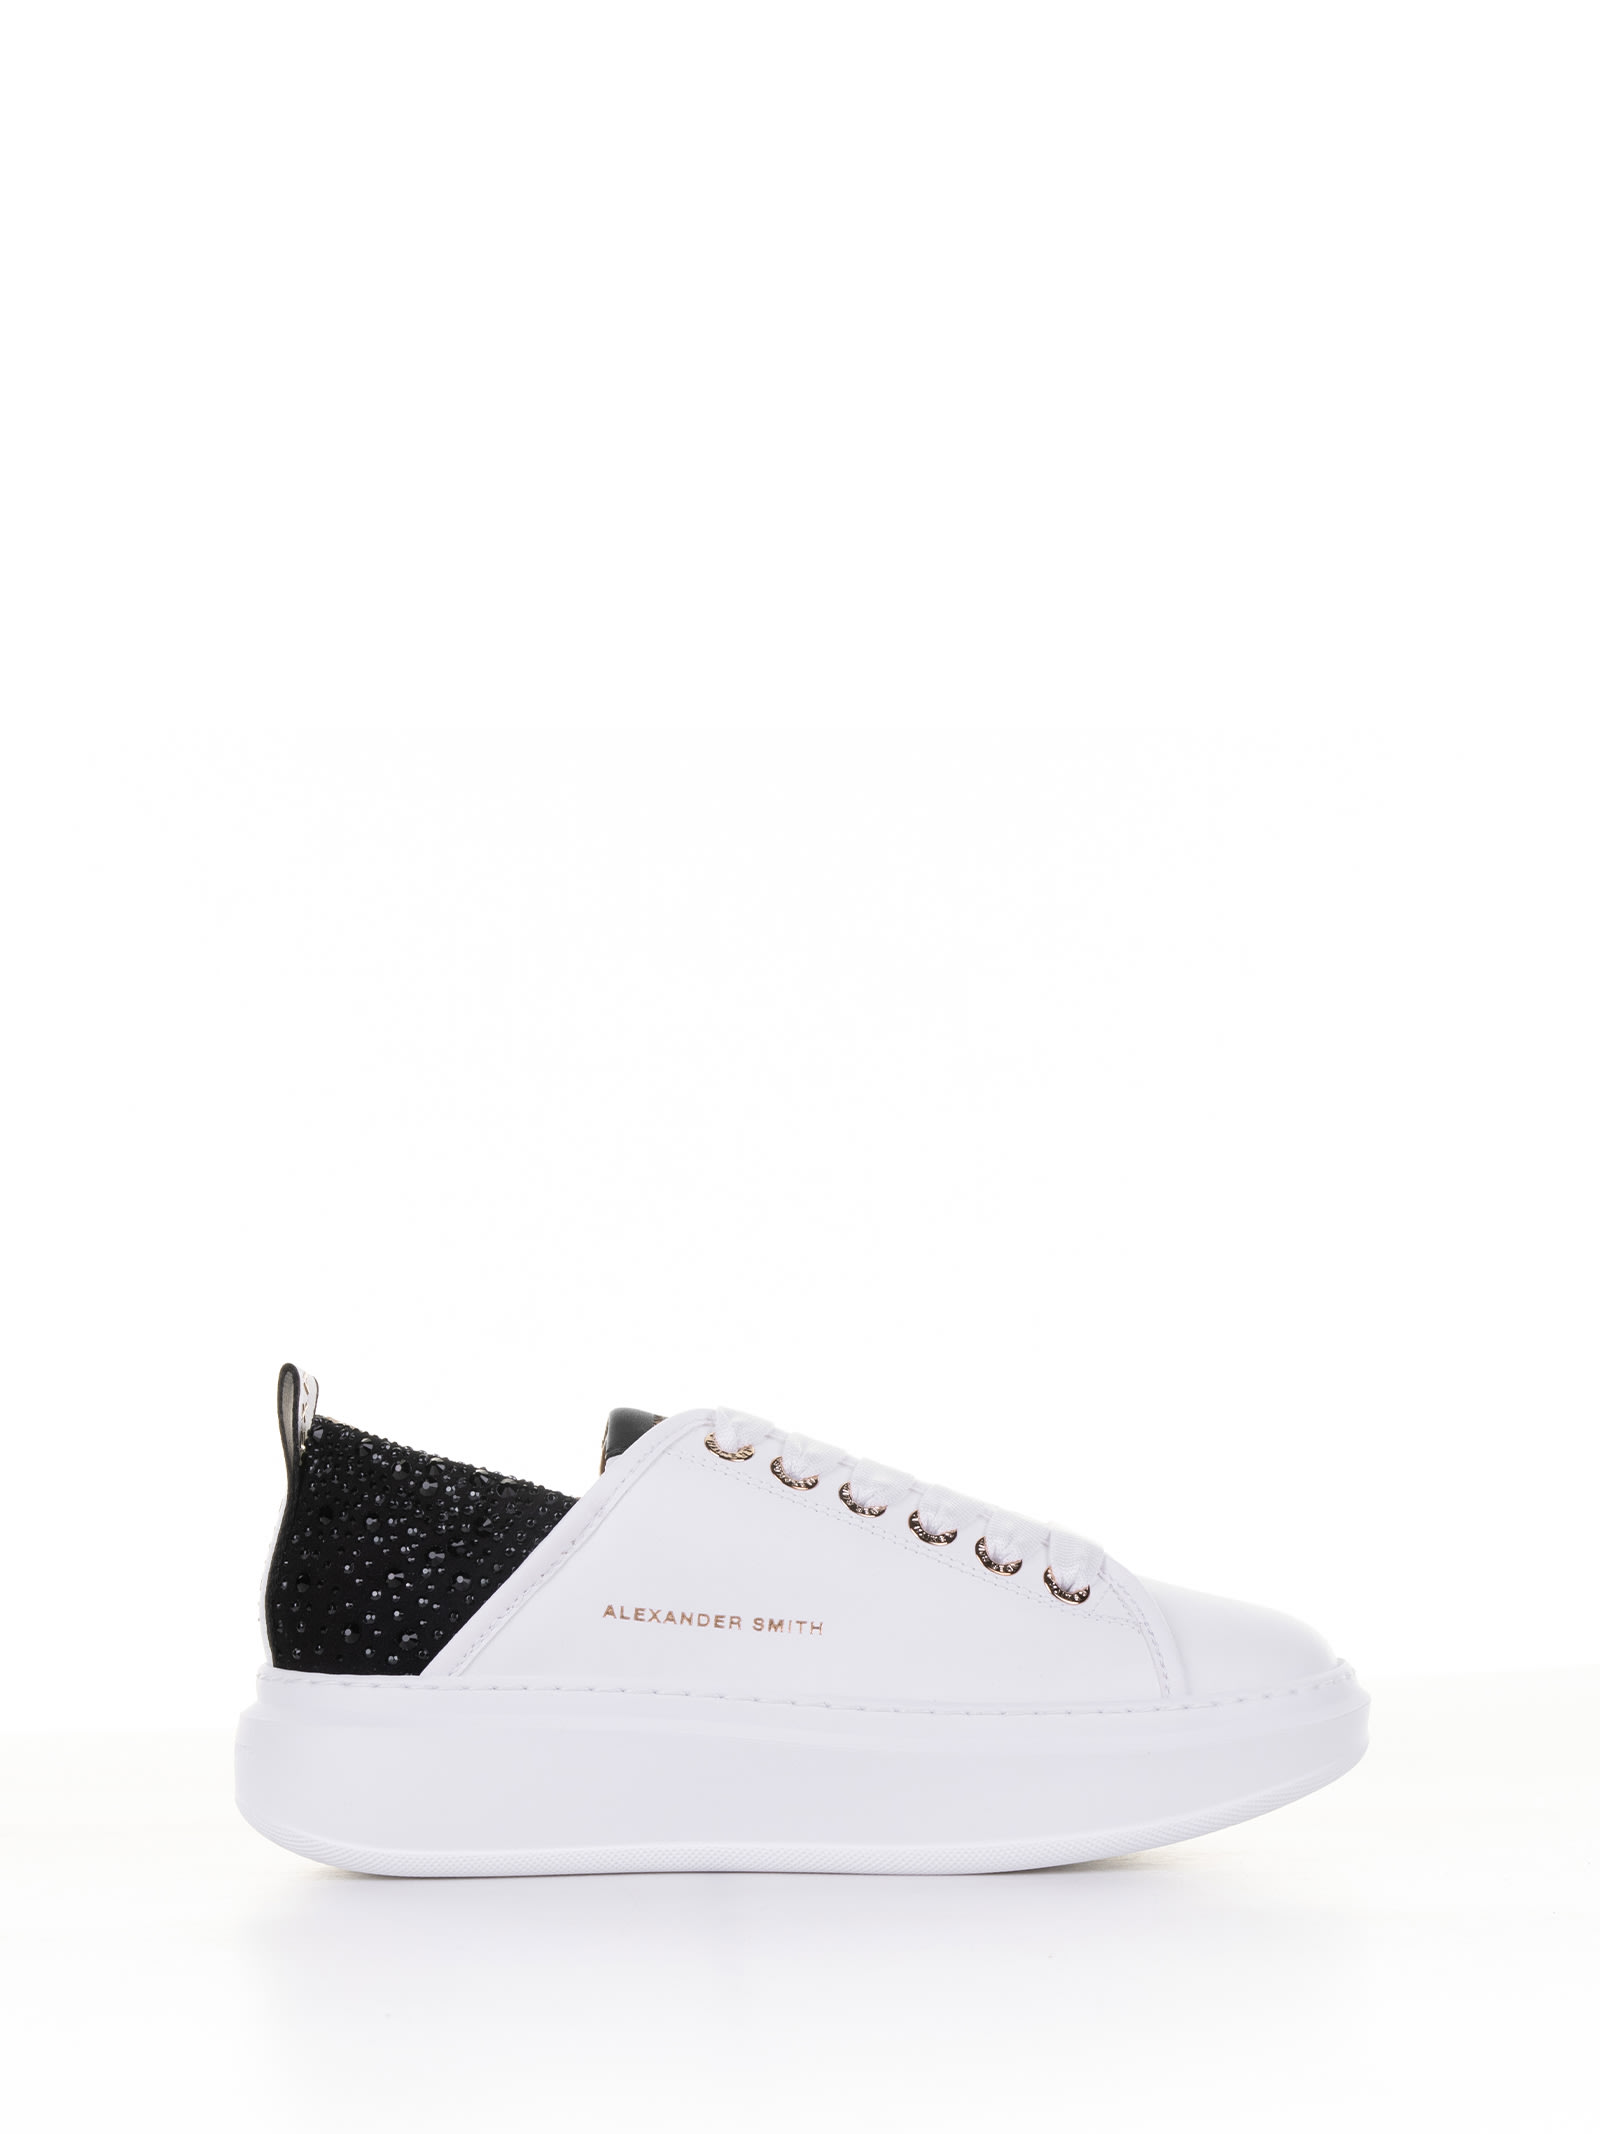 Wembley Sneaker In Leather And Rhinestones